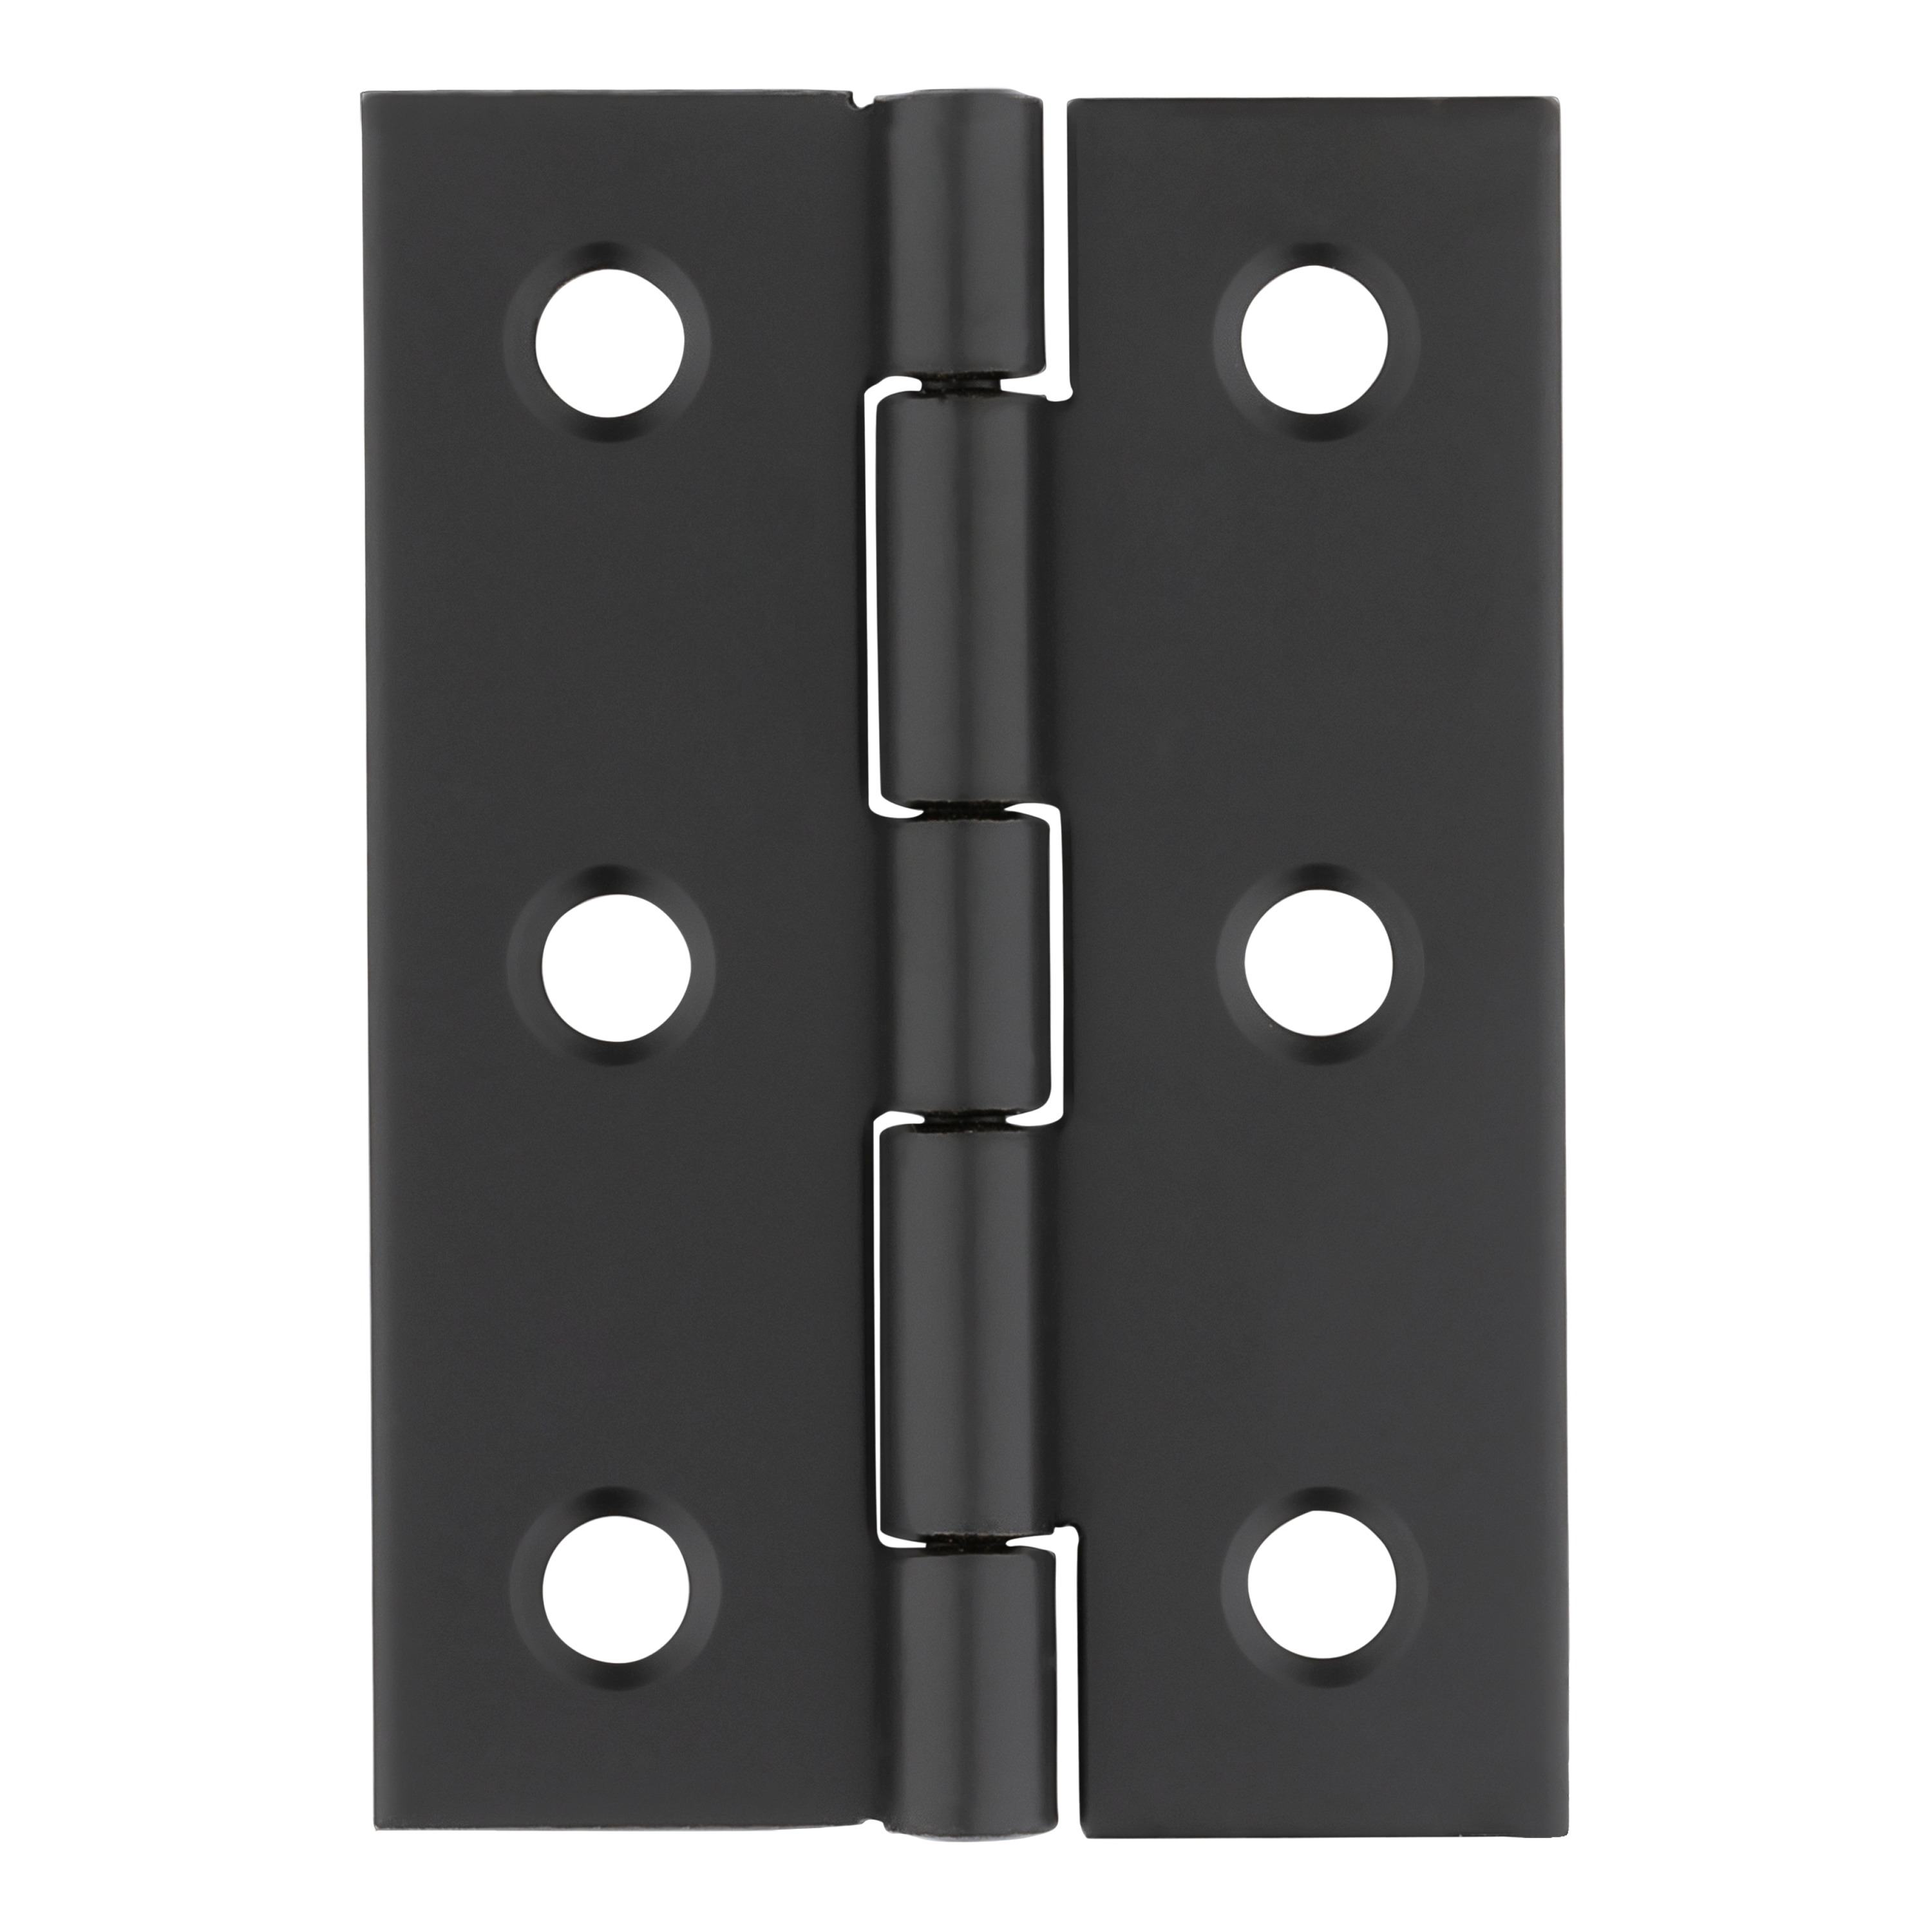 RELIABILT 2-Pack 180-Degree Opening Oil Rubbed Bronze Broad